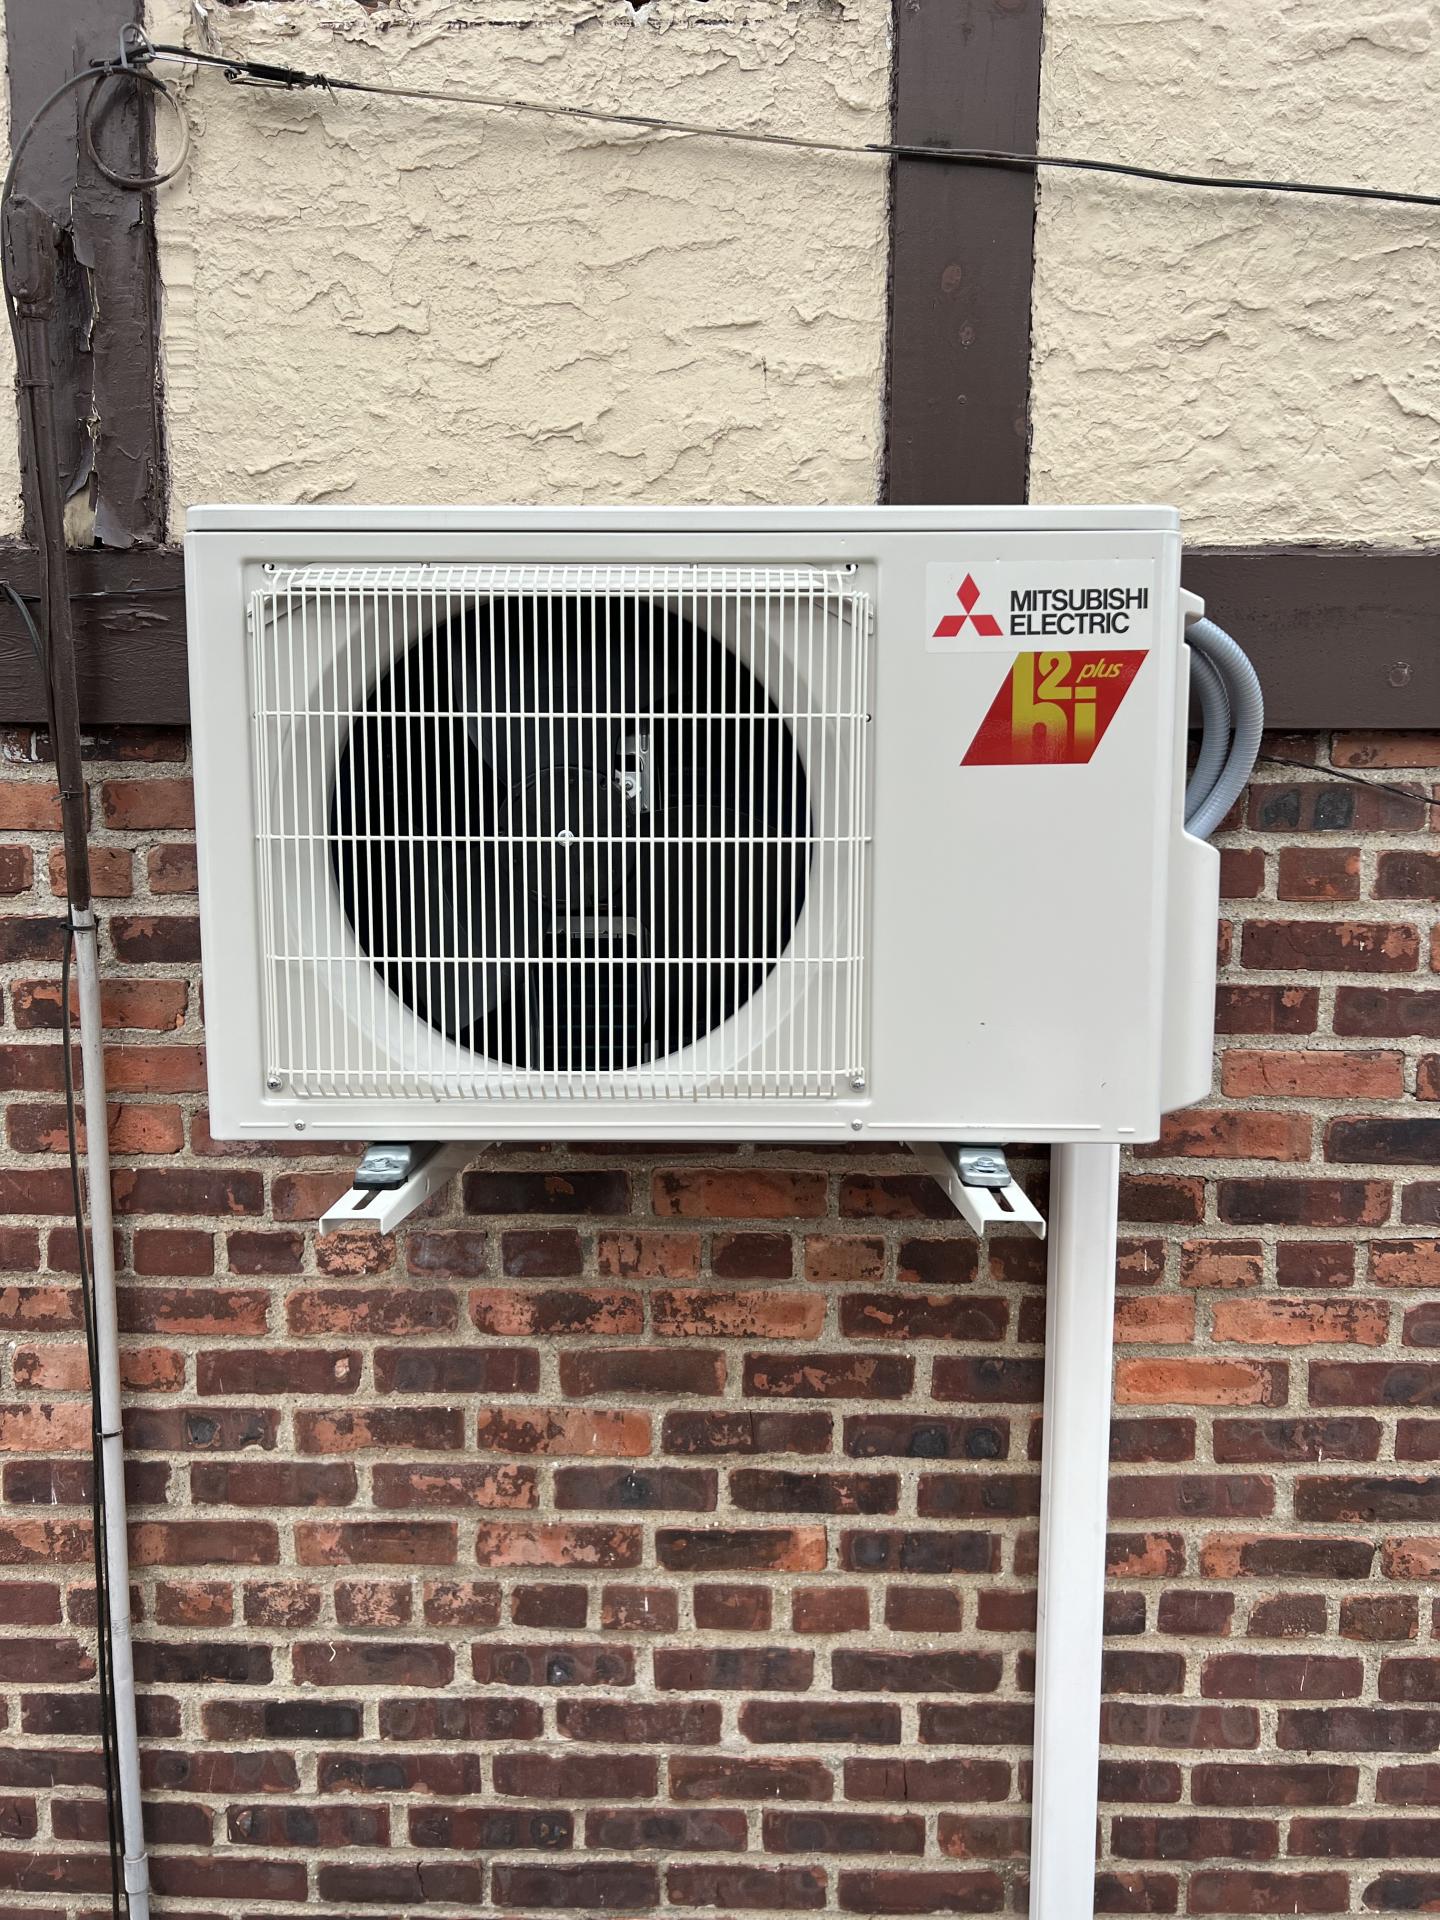 Top Quality Mitsubishi Hvac Heat pump in Forest Hills, Queens, NY